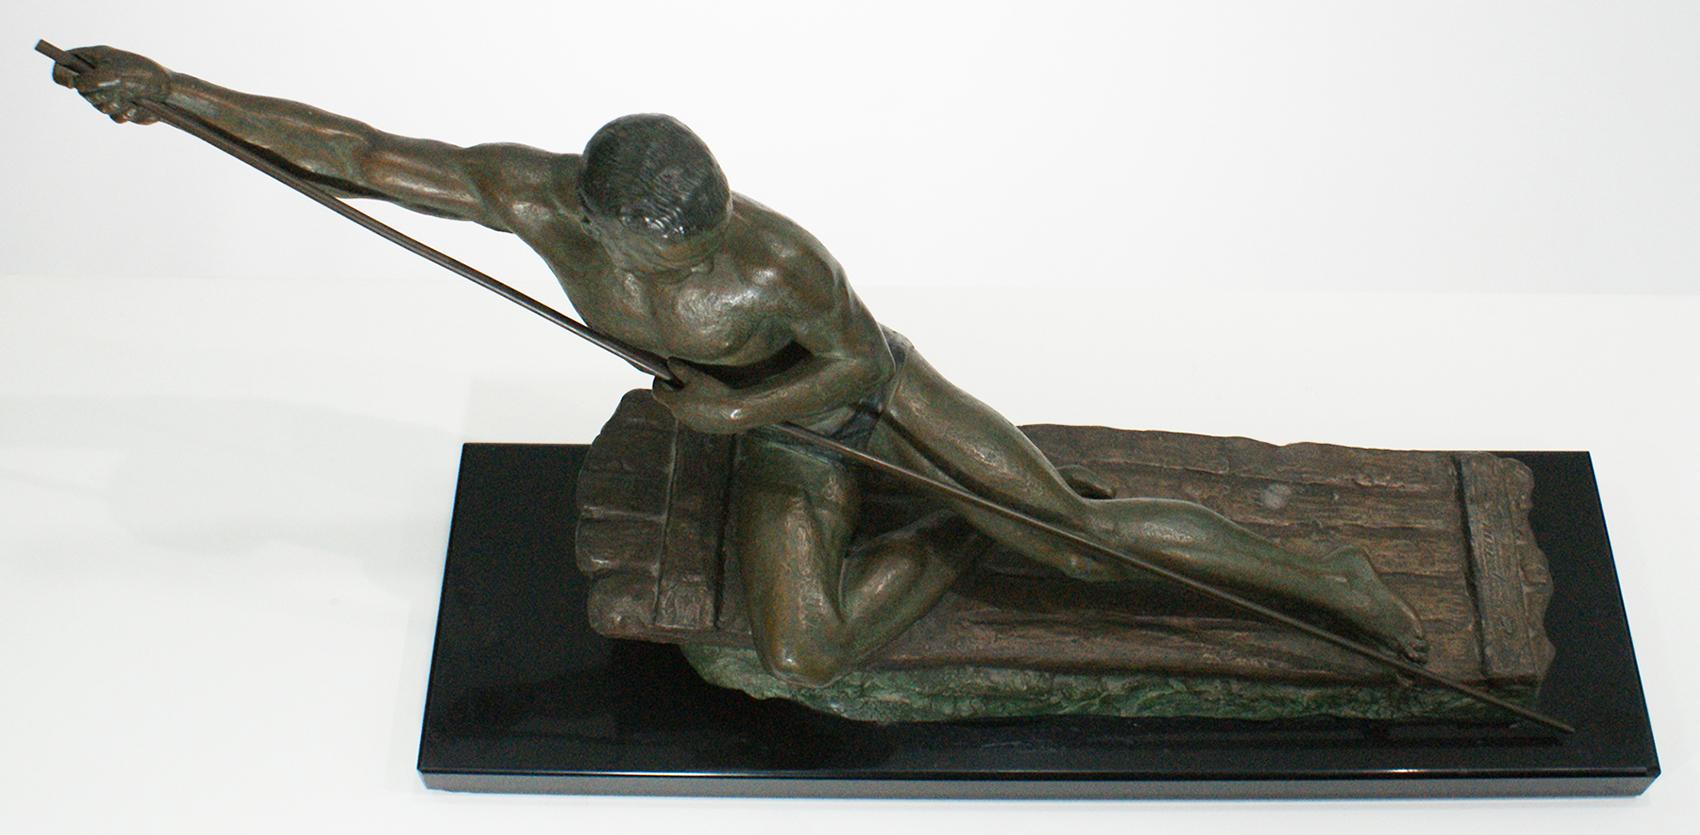 This piece has a green bronze patina showing a man on a raft mounted on a Belgium black marble base with the signature of the artist Ugo Cipriani.